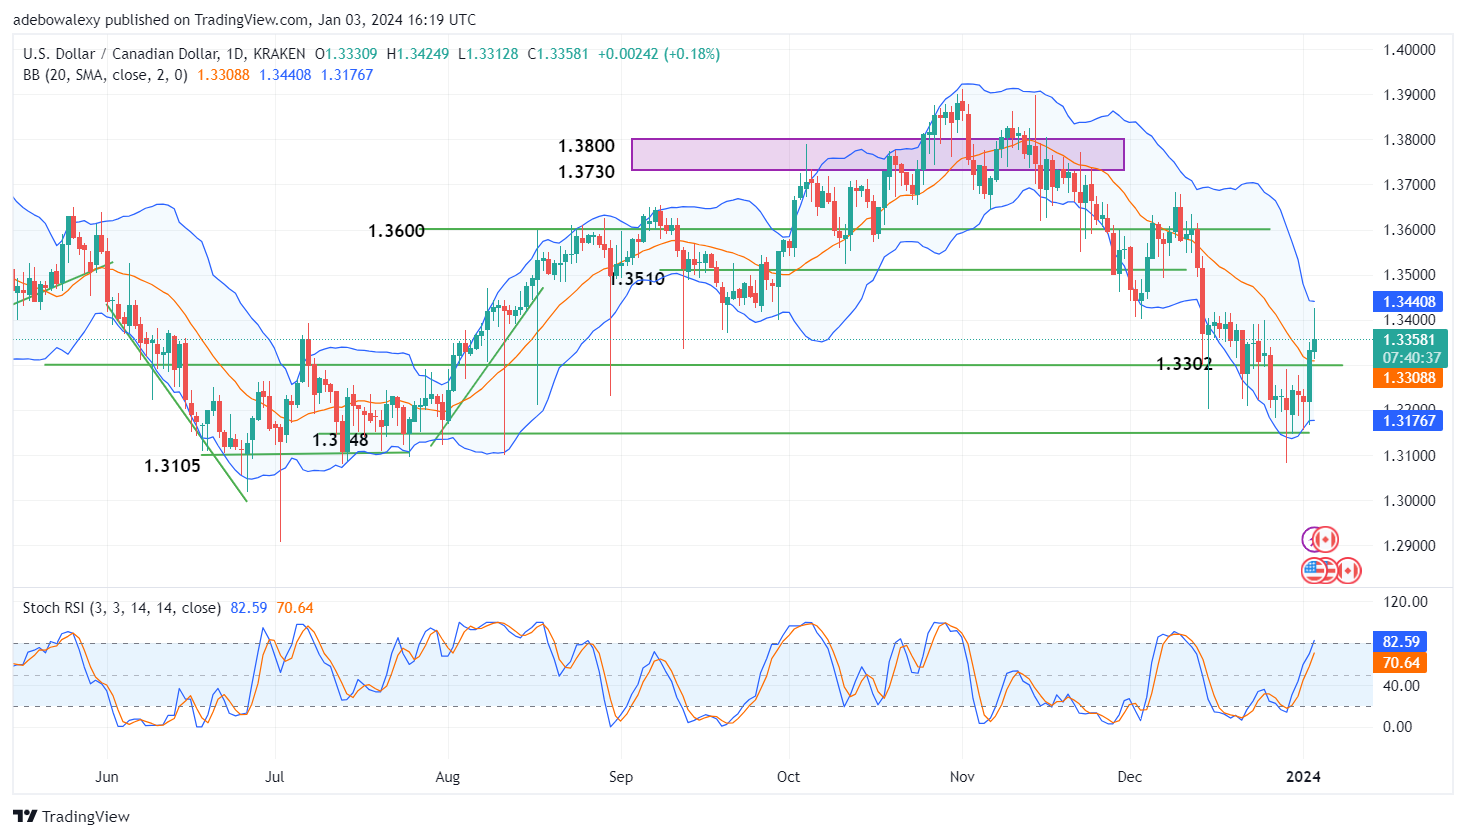 USDCAD Retains Gained Support Above the 1.3302 Mark